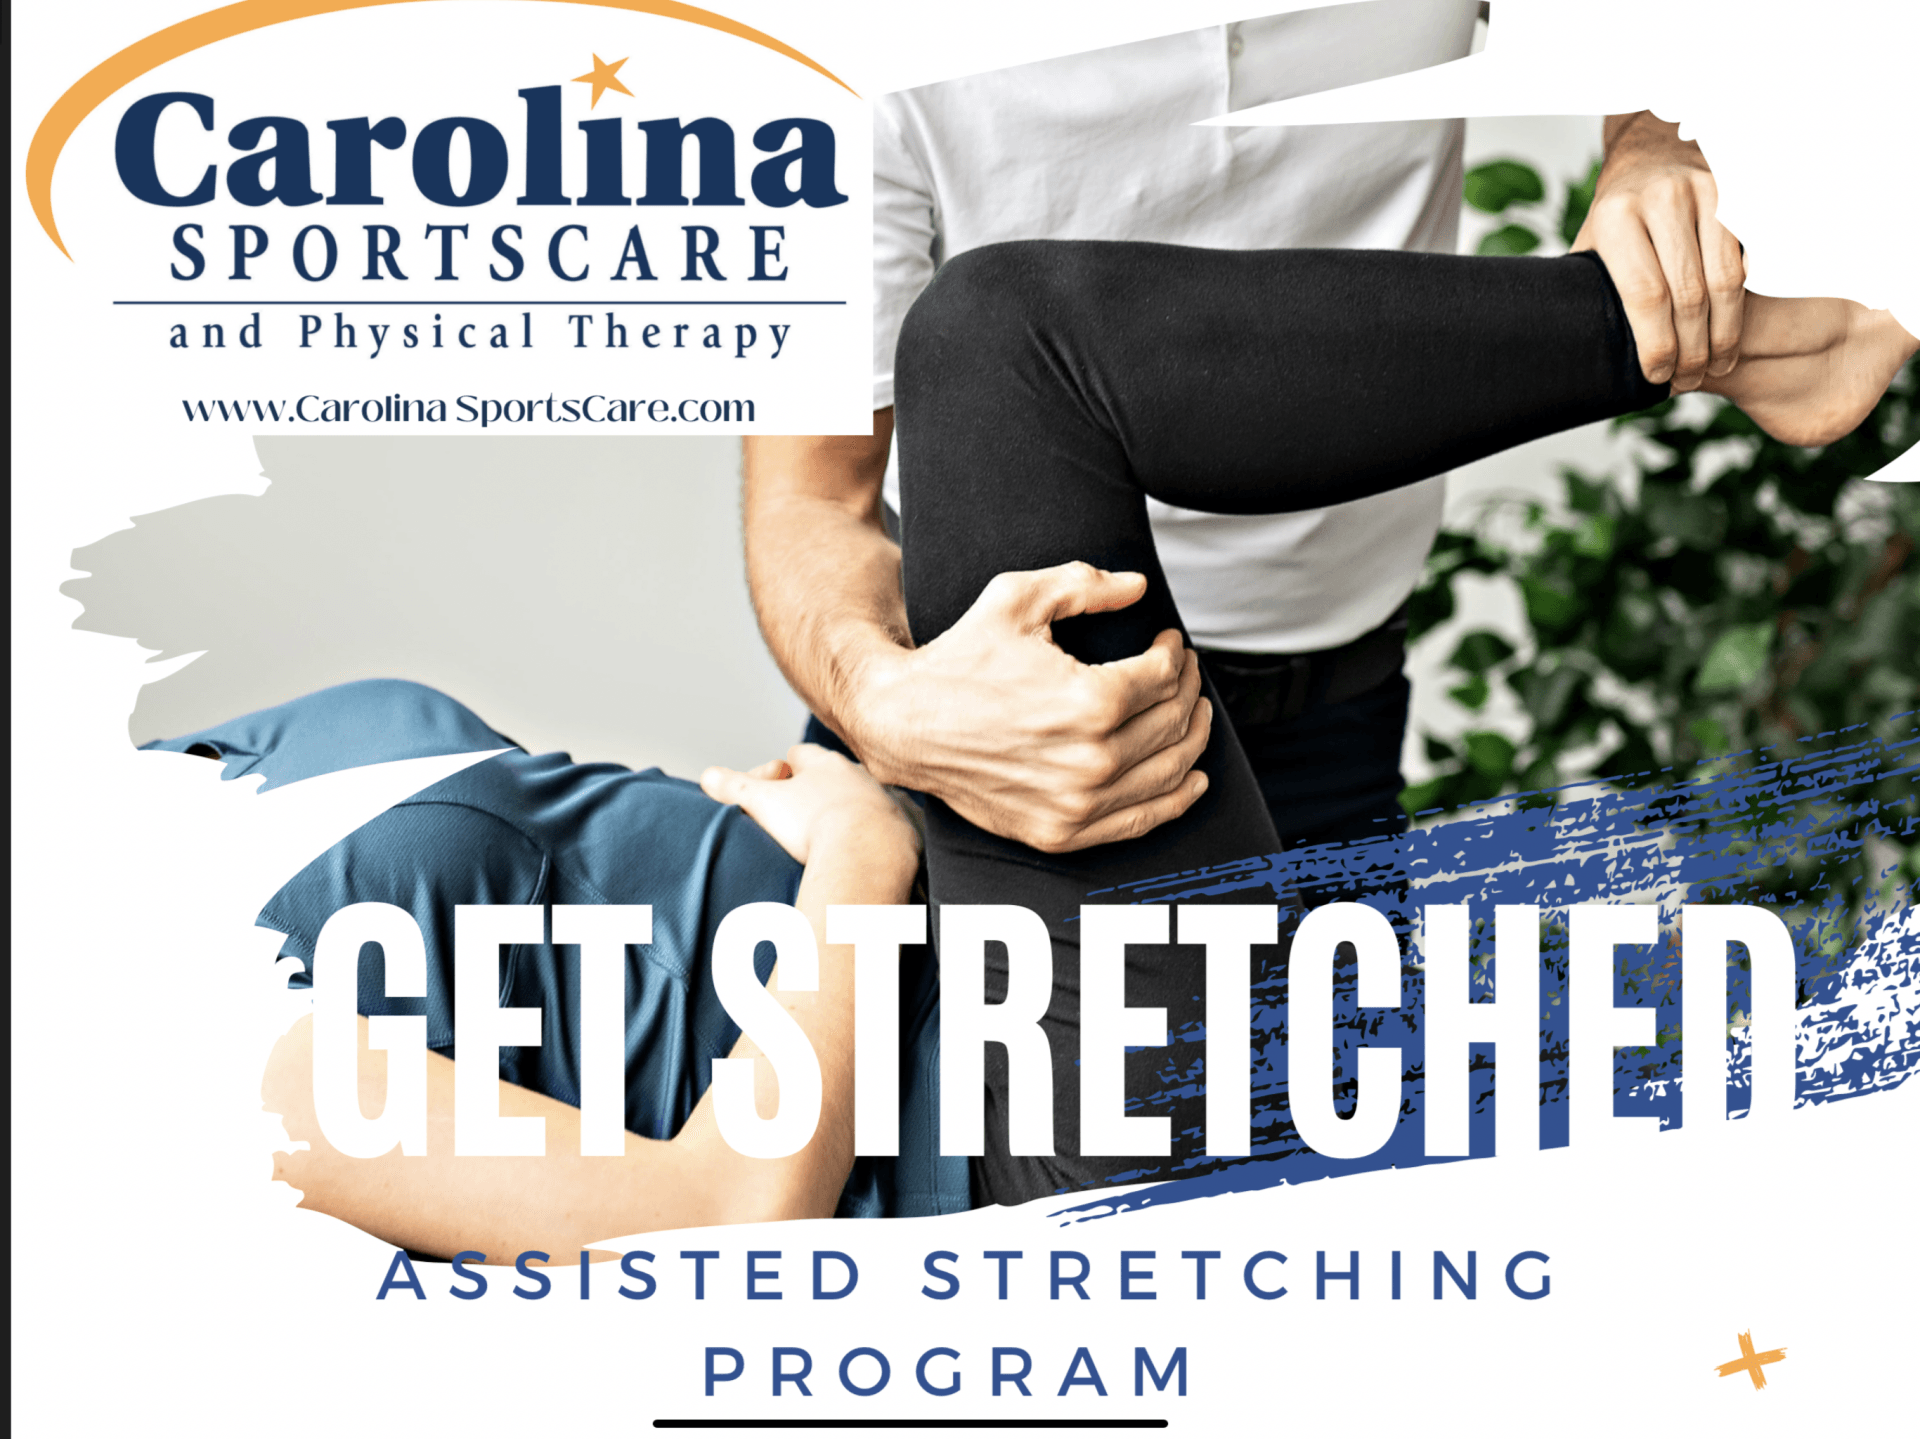 assistant stretching program